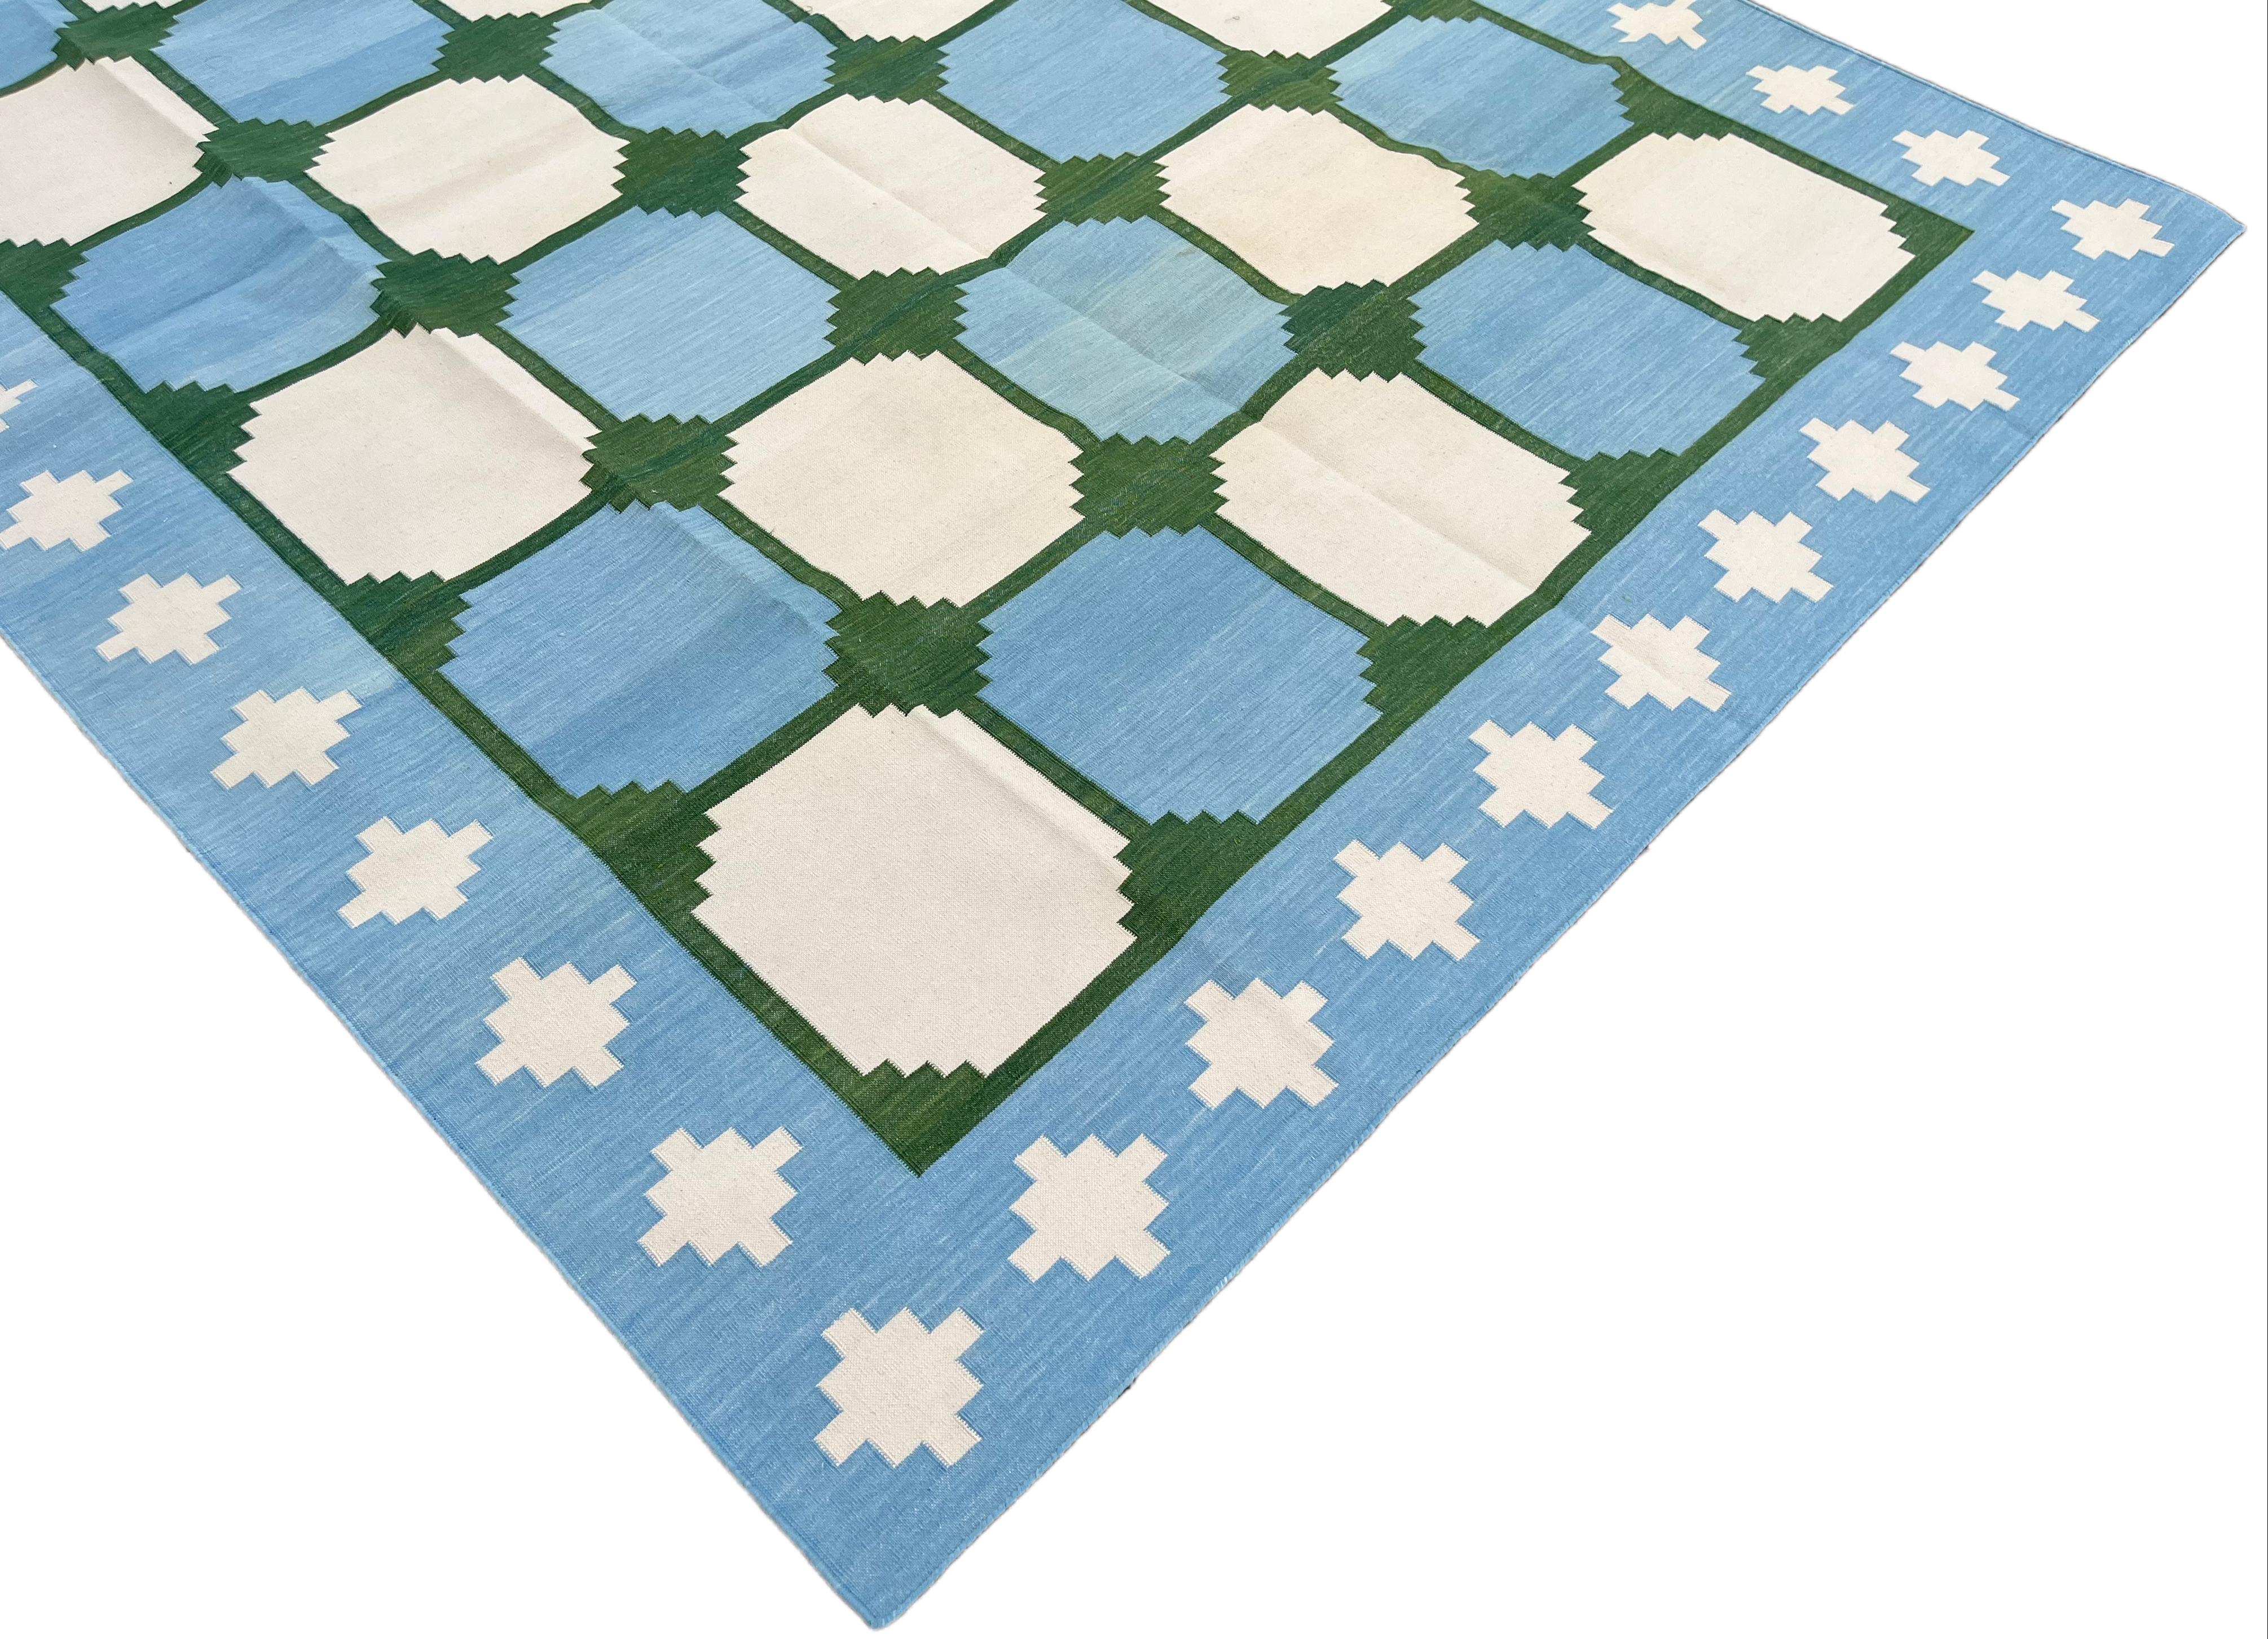 Hand-Woven Handmade Cotton Area Flat Weave Rug, Blue & Green Geometric Tile Indian Dhurrie For Sale